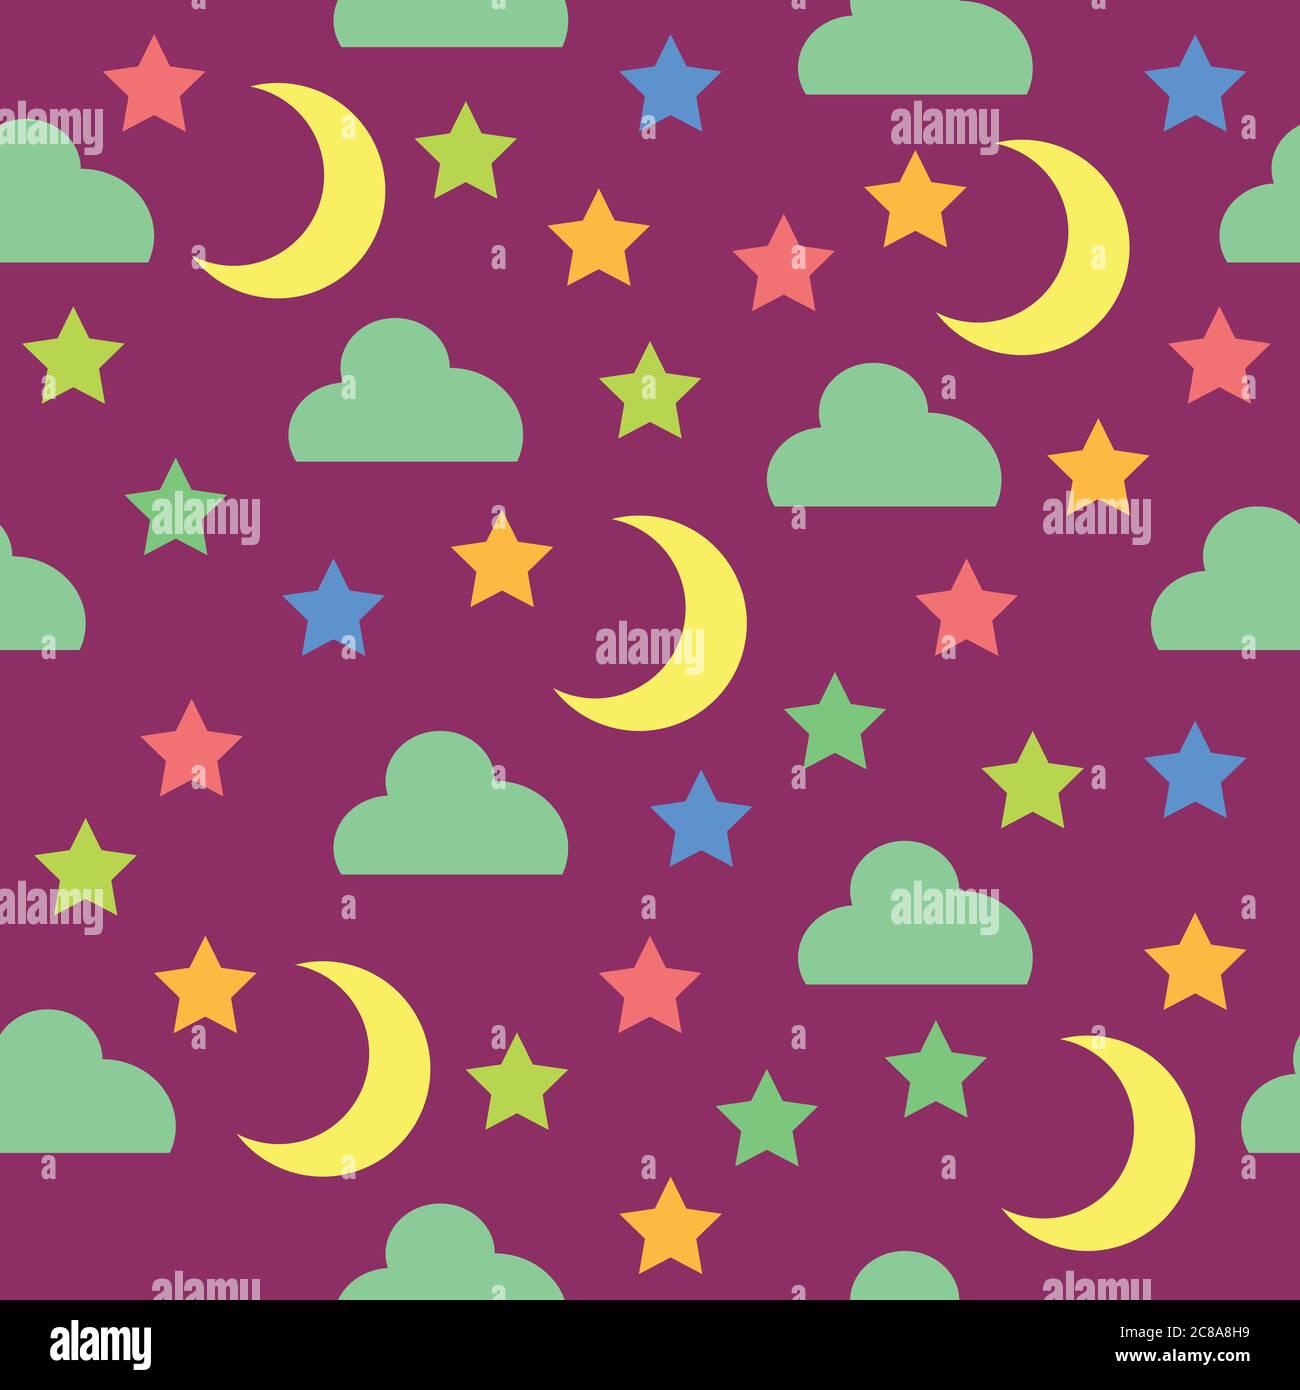 Seamless pattern with night sky, moon, stars and clouds on viole Stock Vector